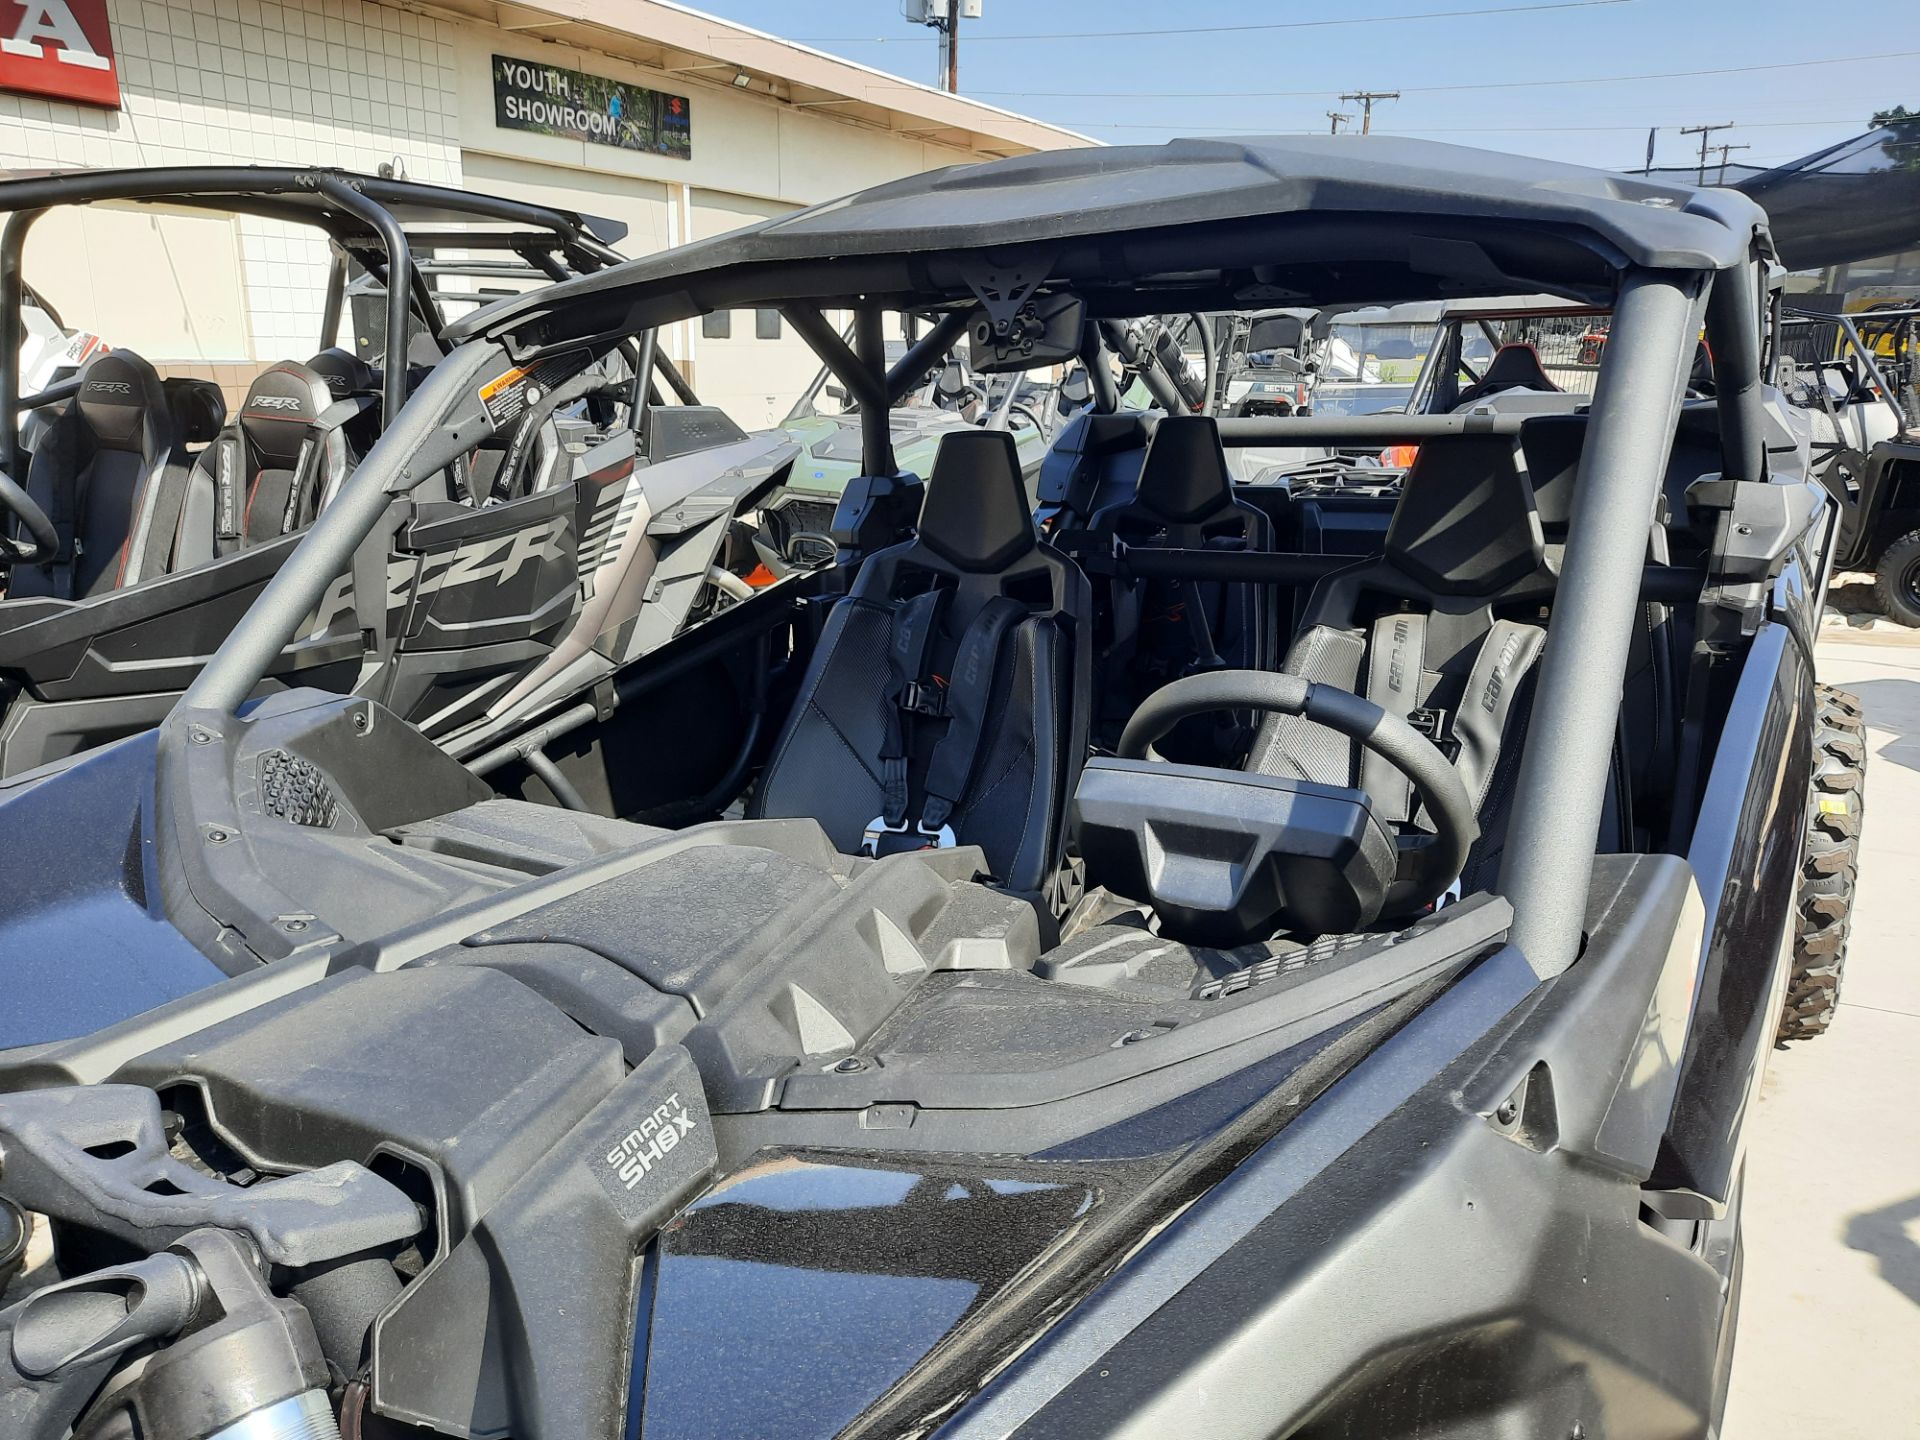 2022 Can-Am Maverick X3 Max X RS Turbo RR with Smart-Shox in Ontario, California - Photo 5